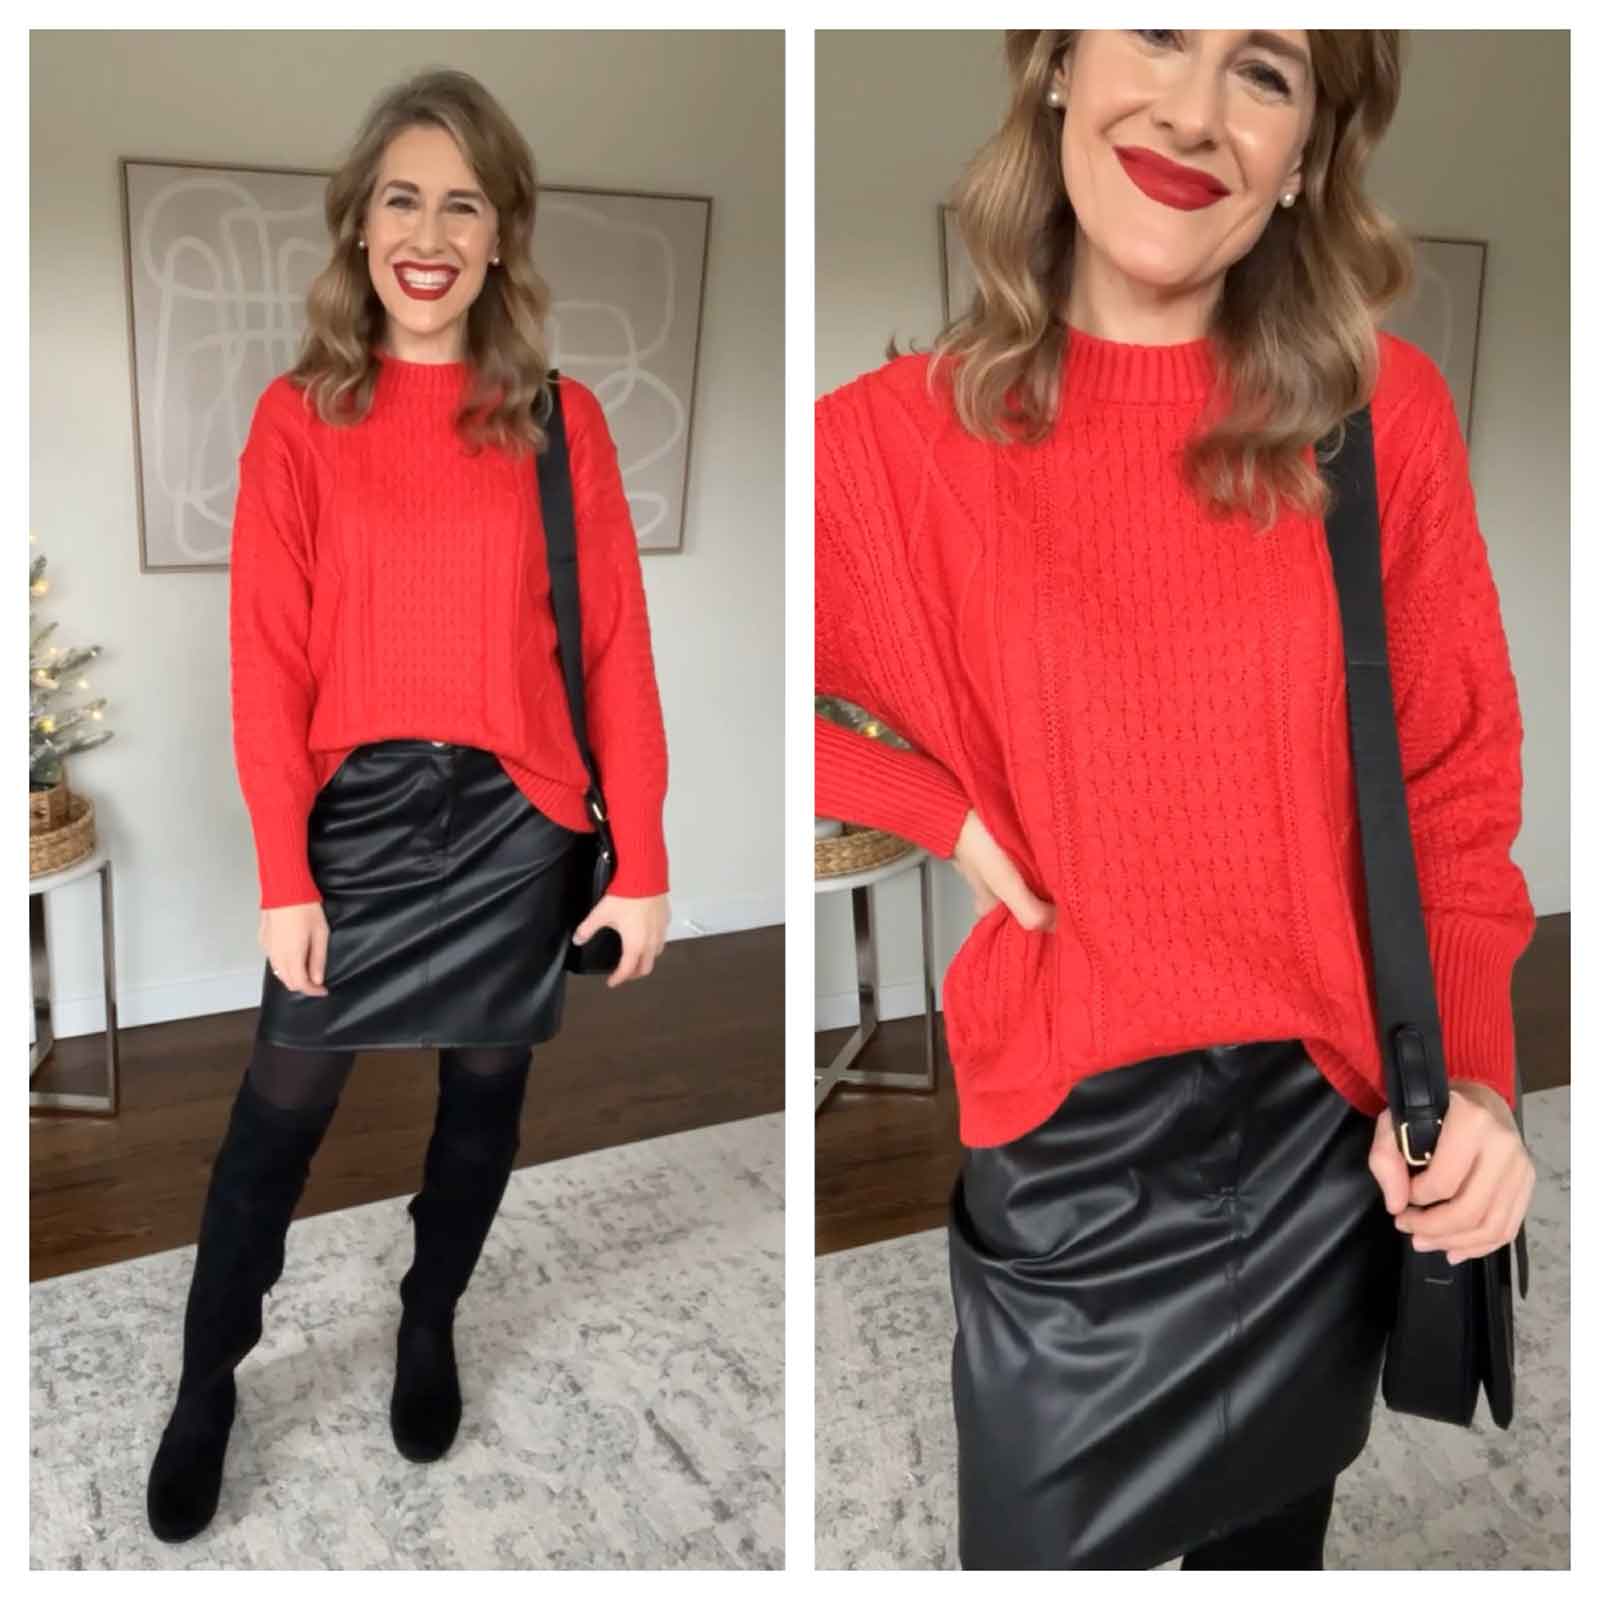 Walmart holiday outfit ideas for Christmas and New Year's Eve party